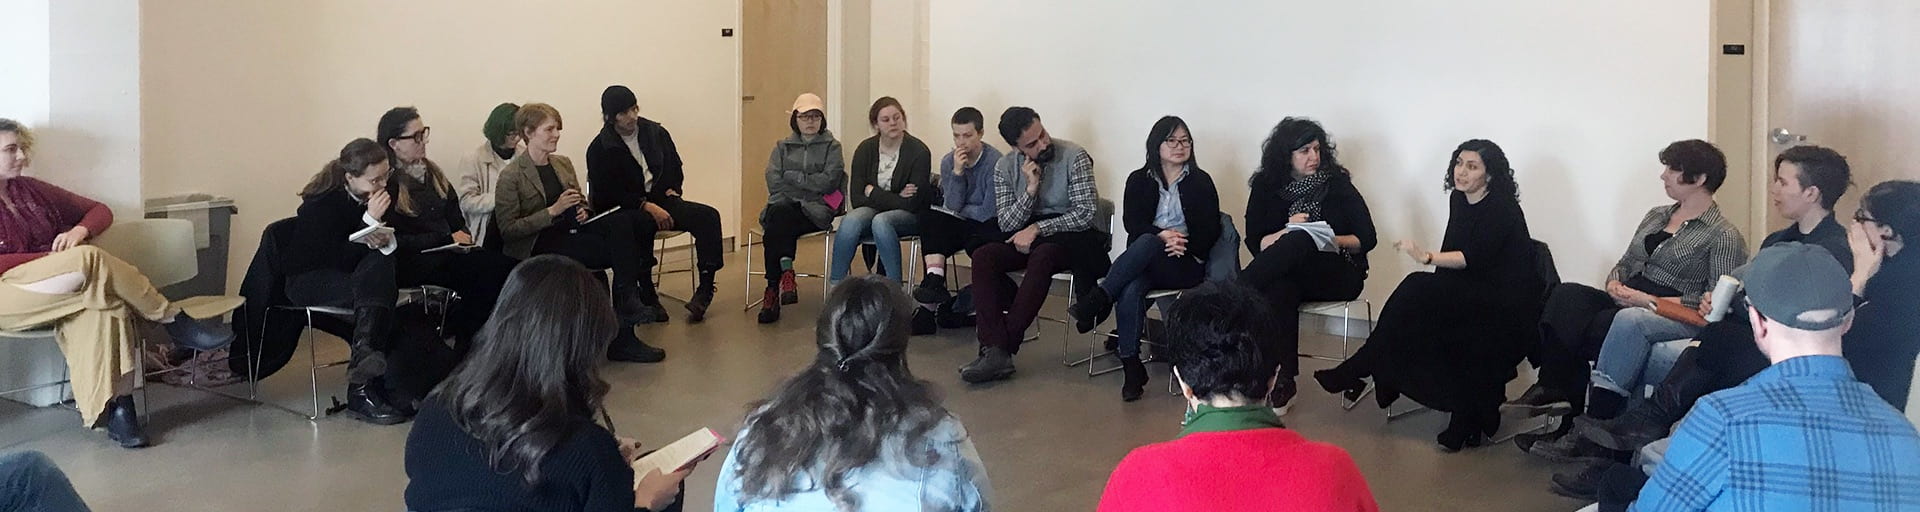 Group of people sit in a circle for a talk at the Center for Art Research.